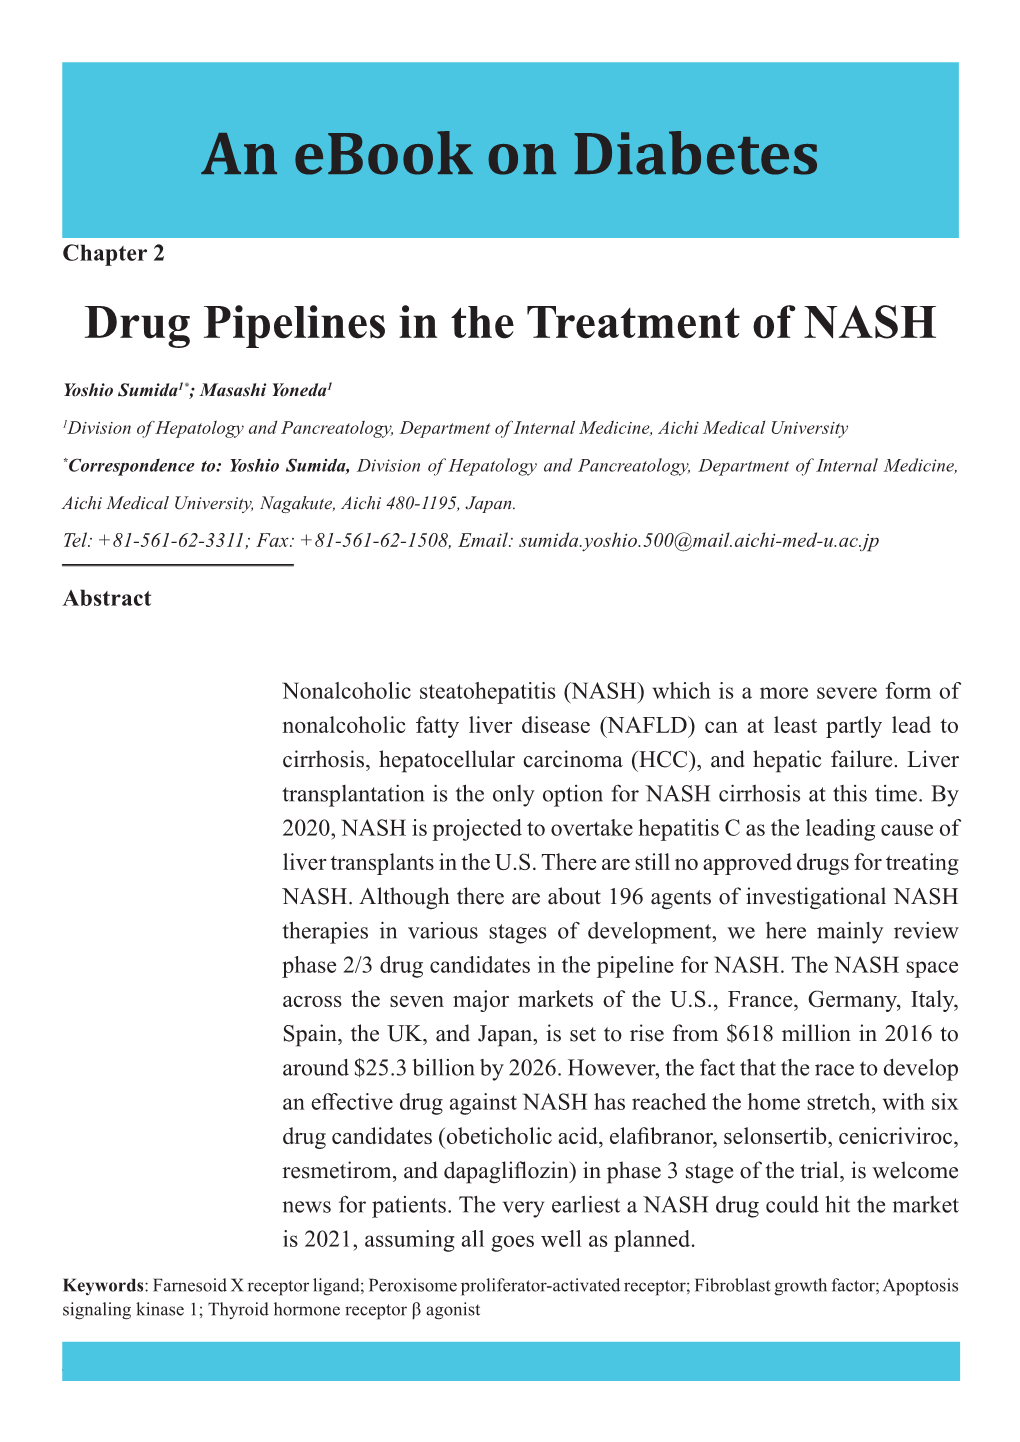 Drug Pipelines in the Treatment of NASH